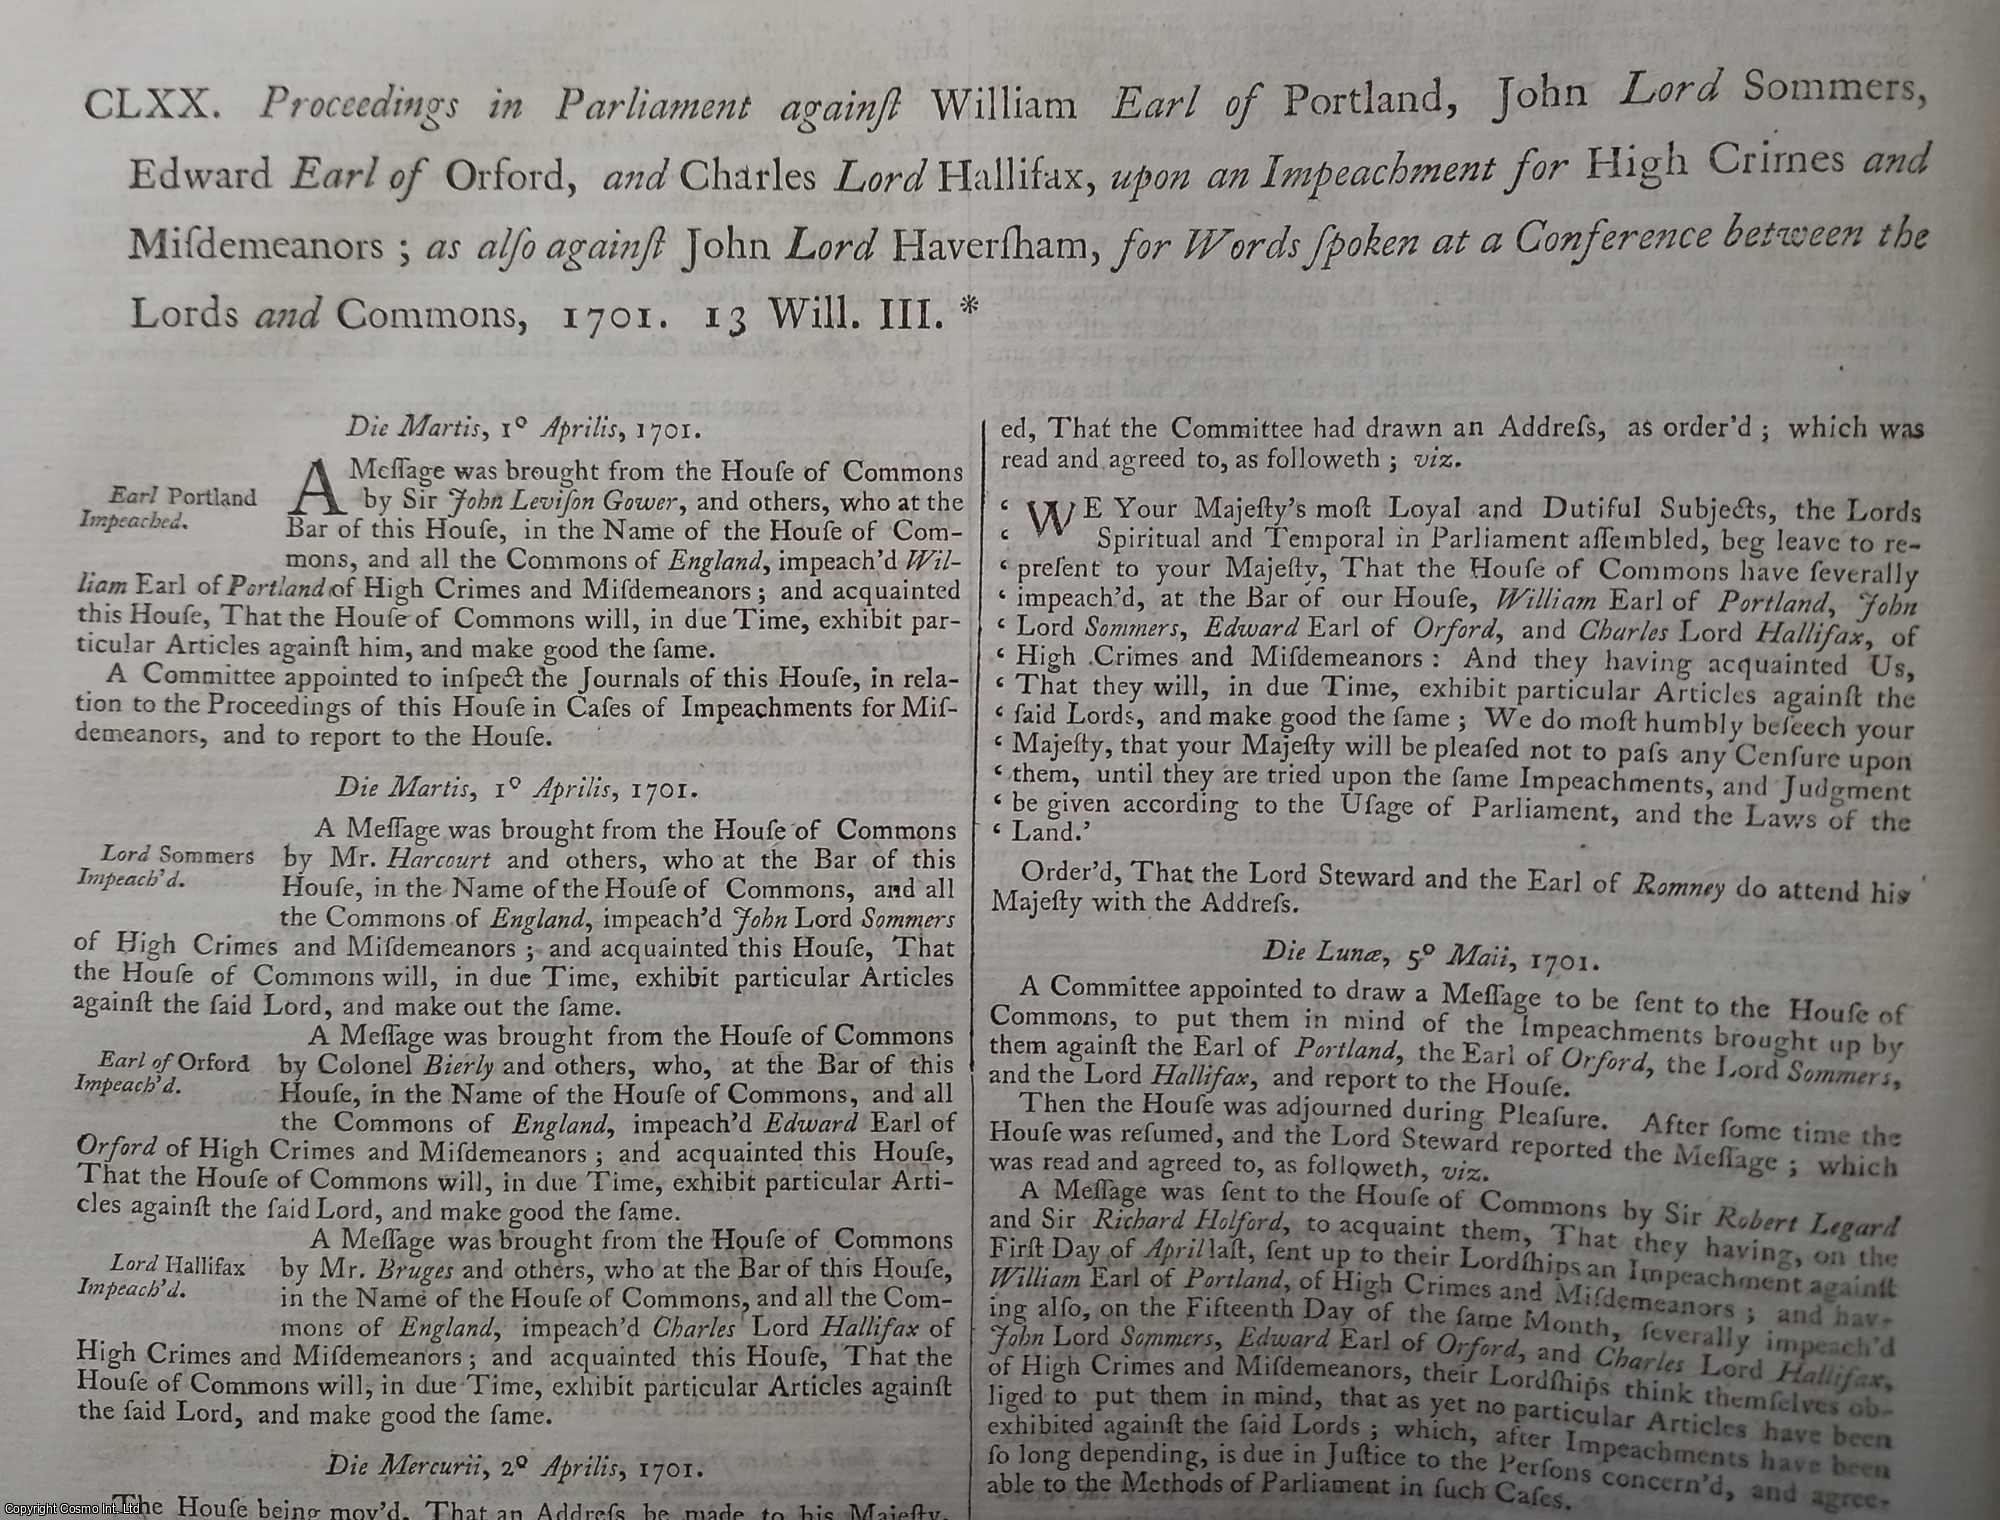 [Trial] - Proceedings in Parliament against Portland, Sommers, Orford, & Halifax, upon an Impeachment for High Crimes and Misdemeanours; as also against John Lord Haversham, for Words spoken at a Conference between the Lords & Commons, 1701. An original article from the Collected State Trials.